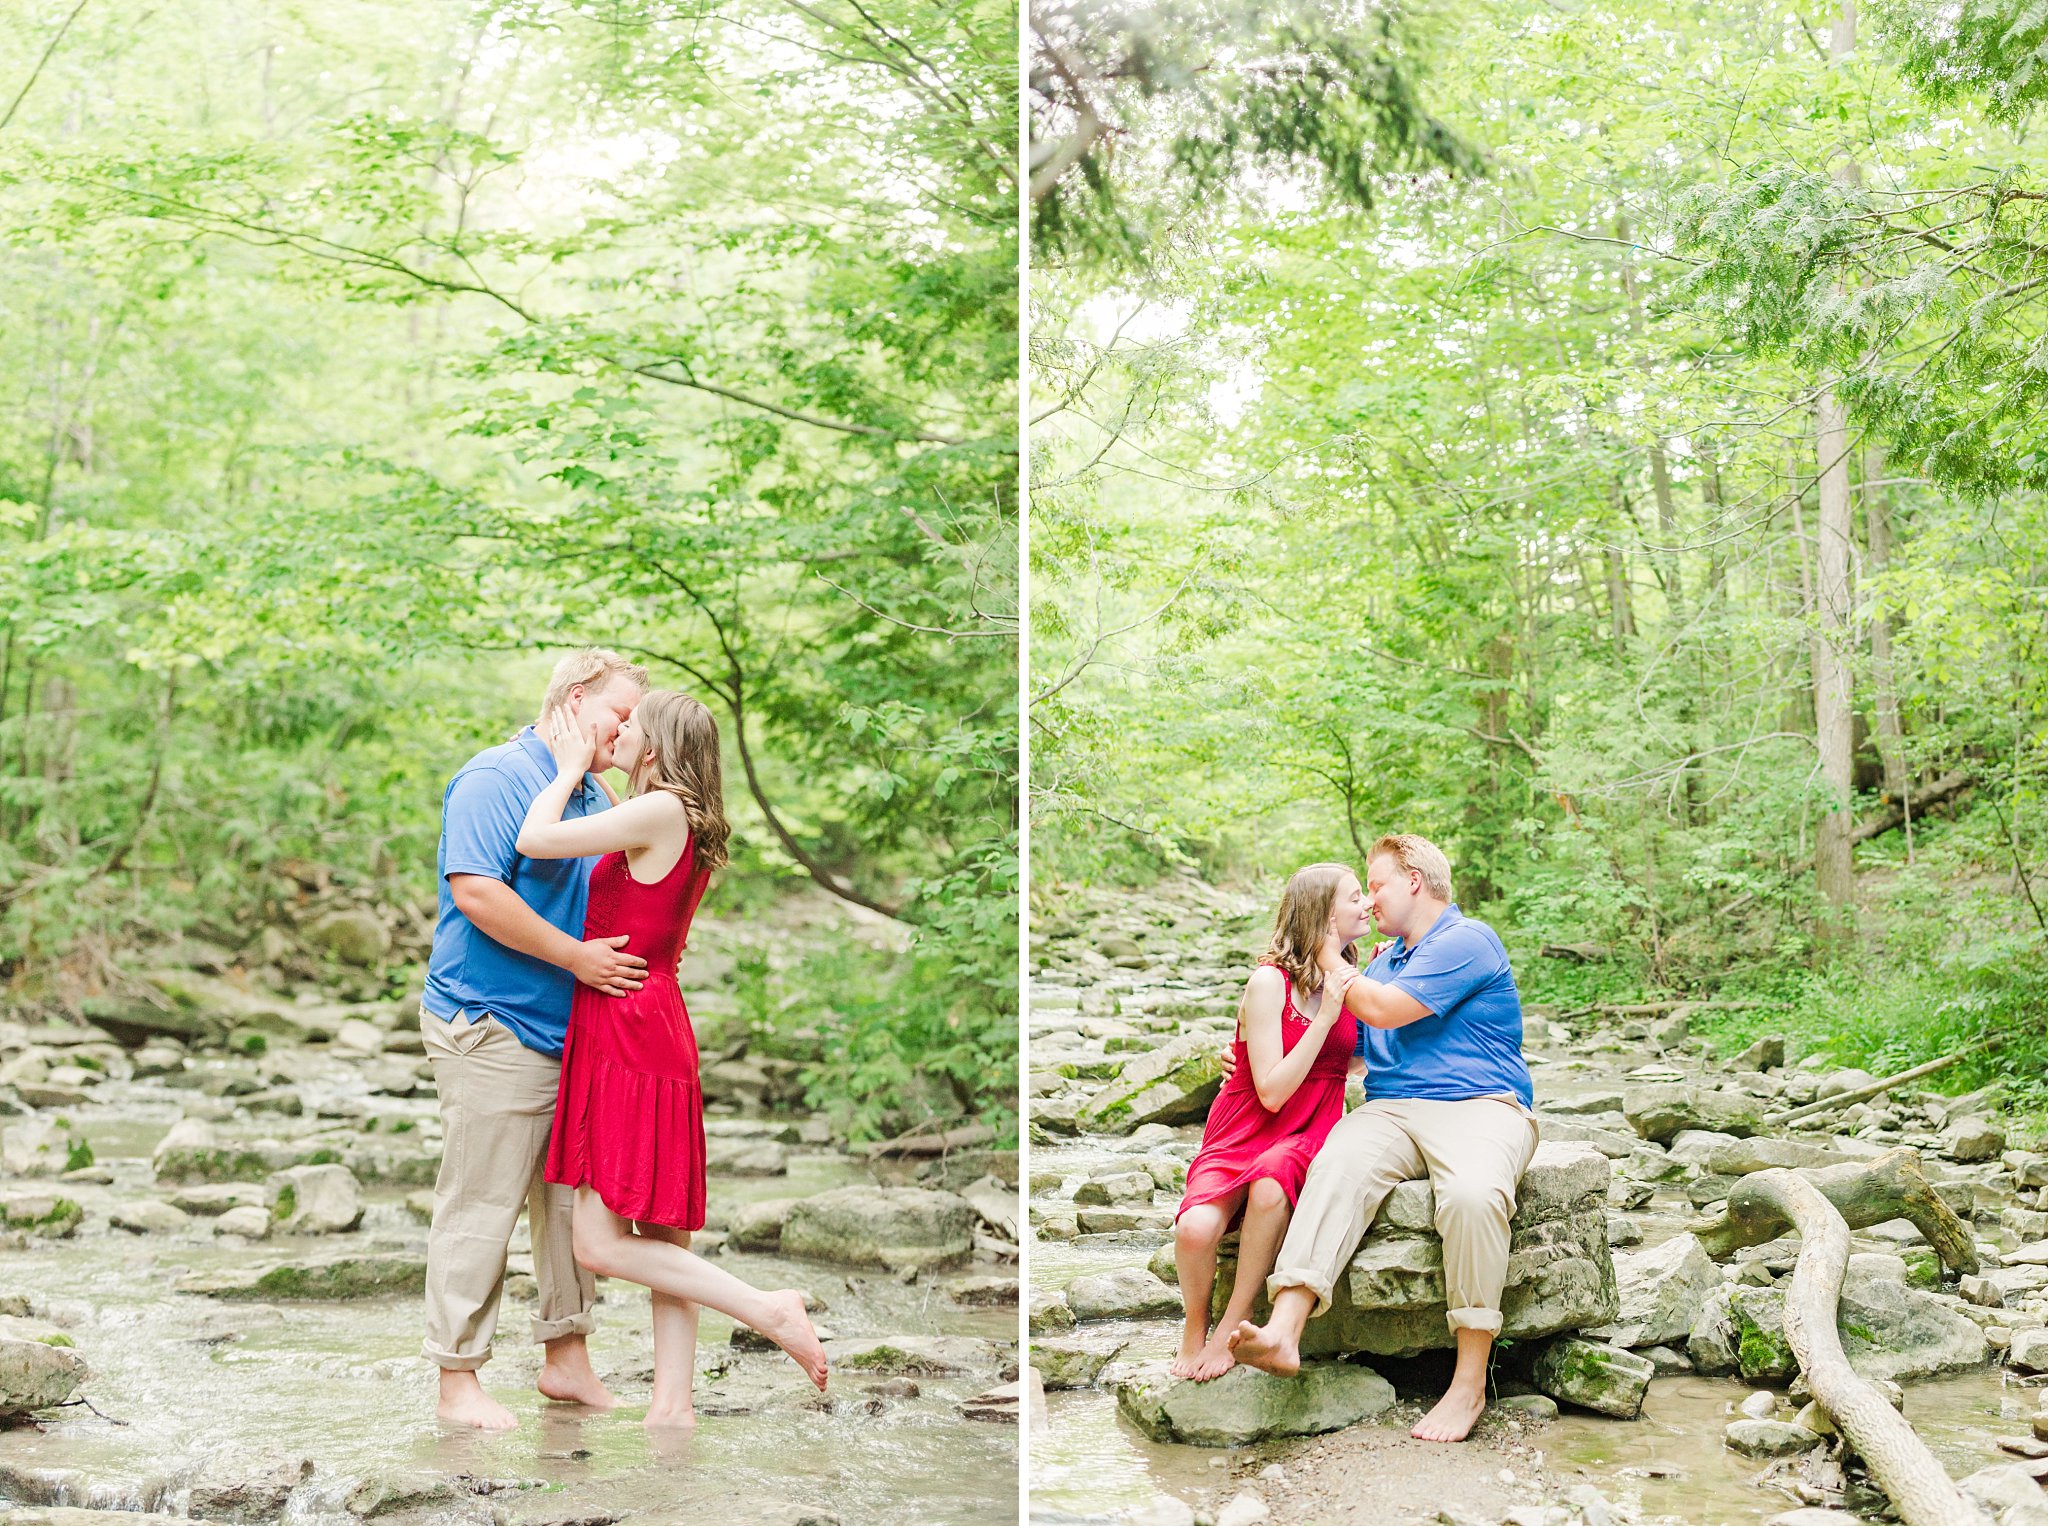 wedding photographers in london ontario. a couple kisses while standing in a creek, surrounded by water, rocks and trees. the man is wrapping his arms around his fiancé's waist, while she reaches up to touch his jaw and pops her left foot up out of the water